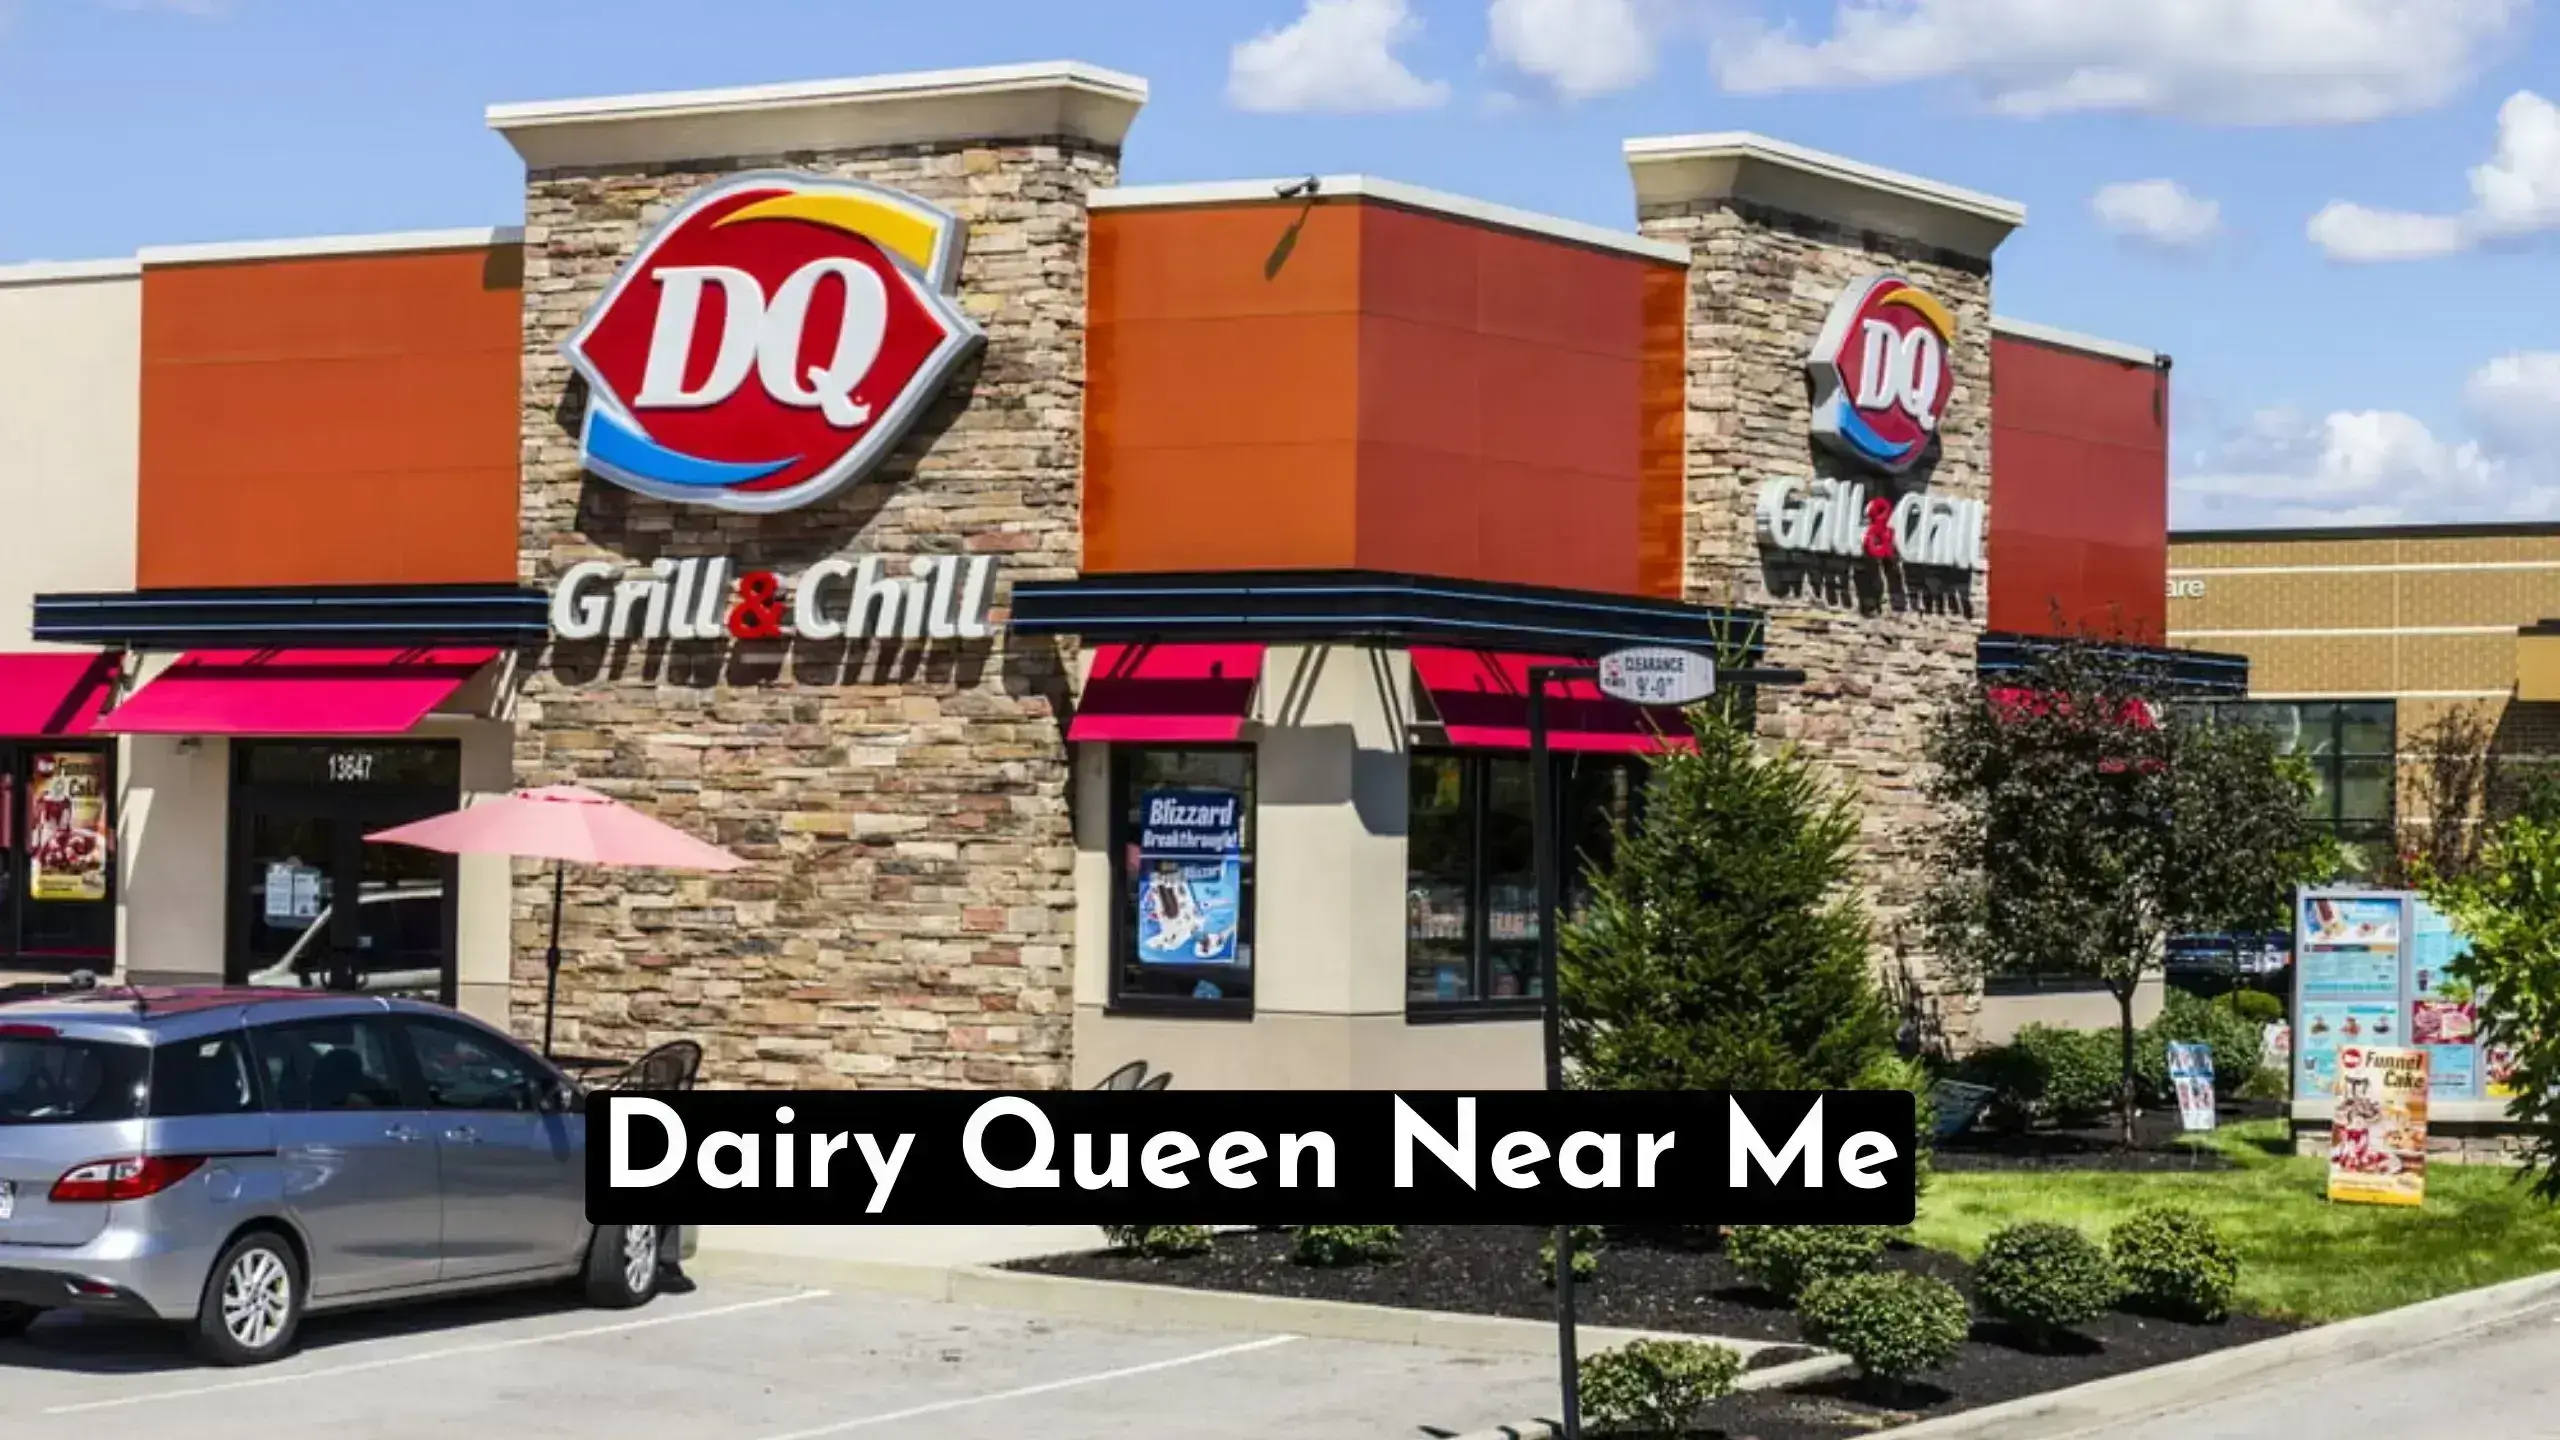 Dairy Queen Near Me: Treat Yourself Today!